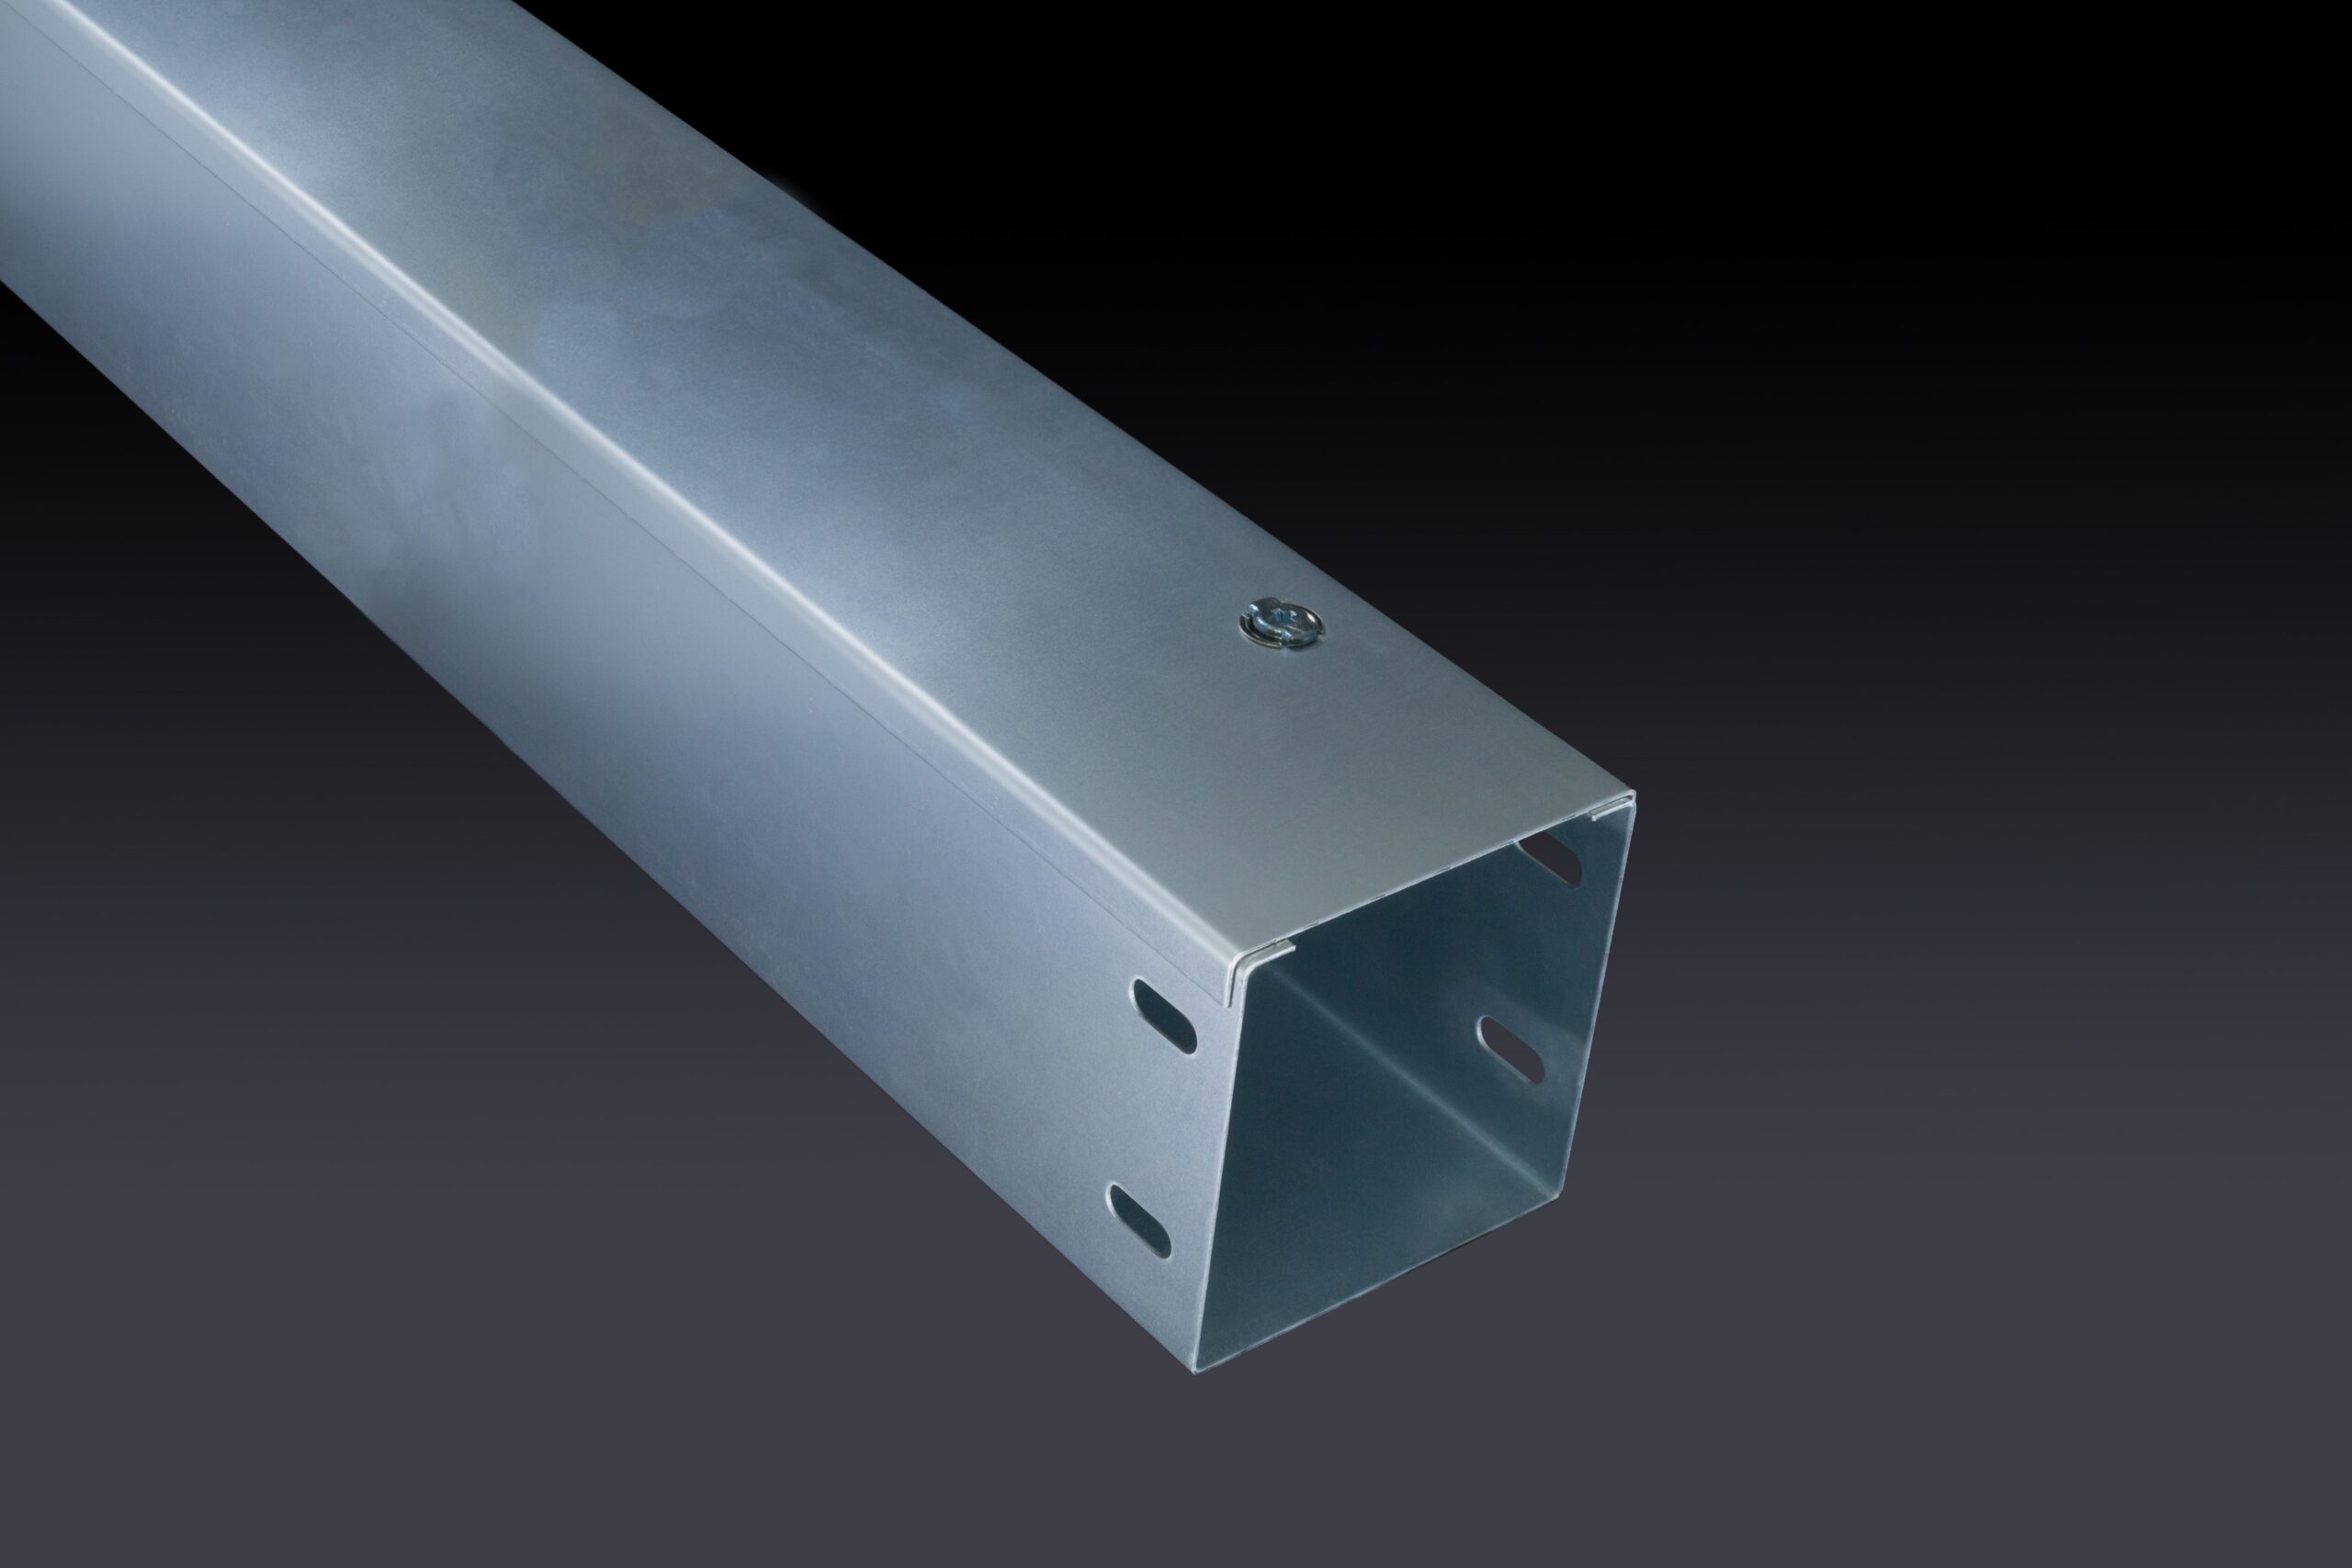 https://inventionsteel.com/wp-content/uploads/2022/07/Cable-Trunking-New-min-scaled.jpg